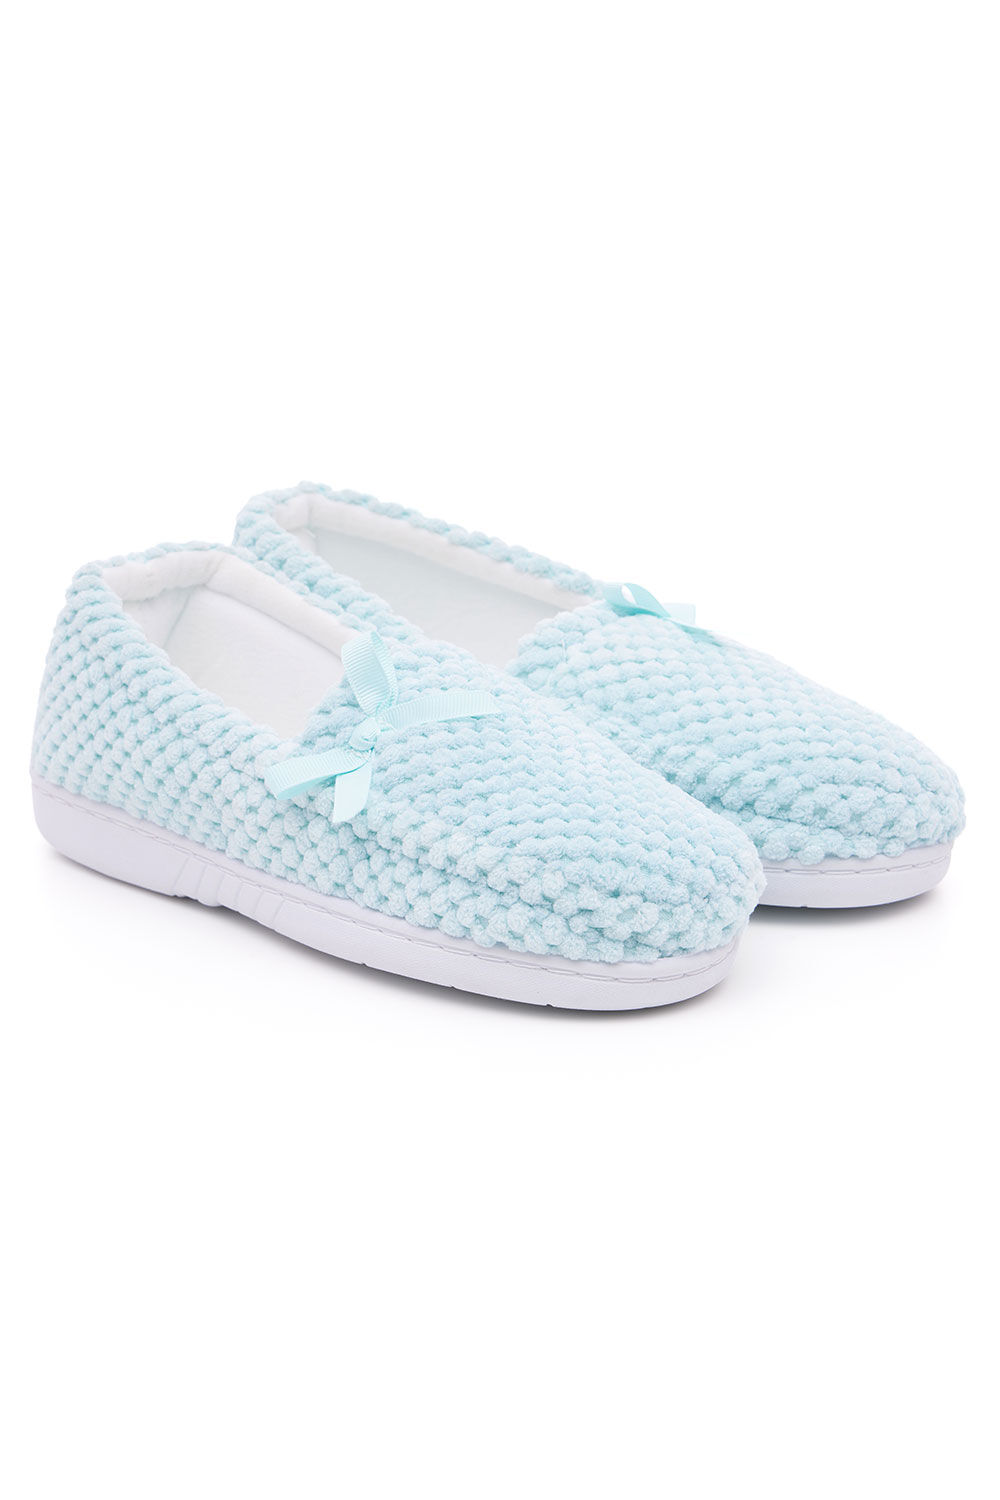 Bonmarche Blue Fleece Moccasin Slippers With Bow Detail, Size: 8